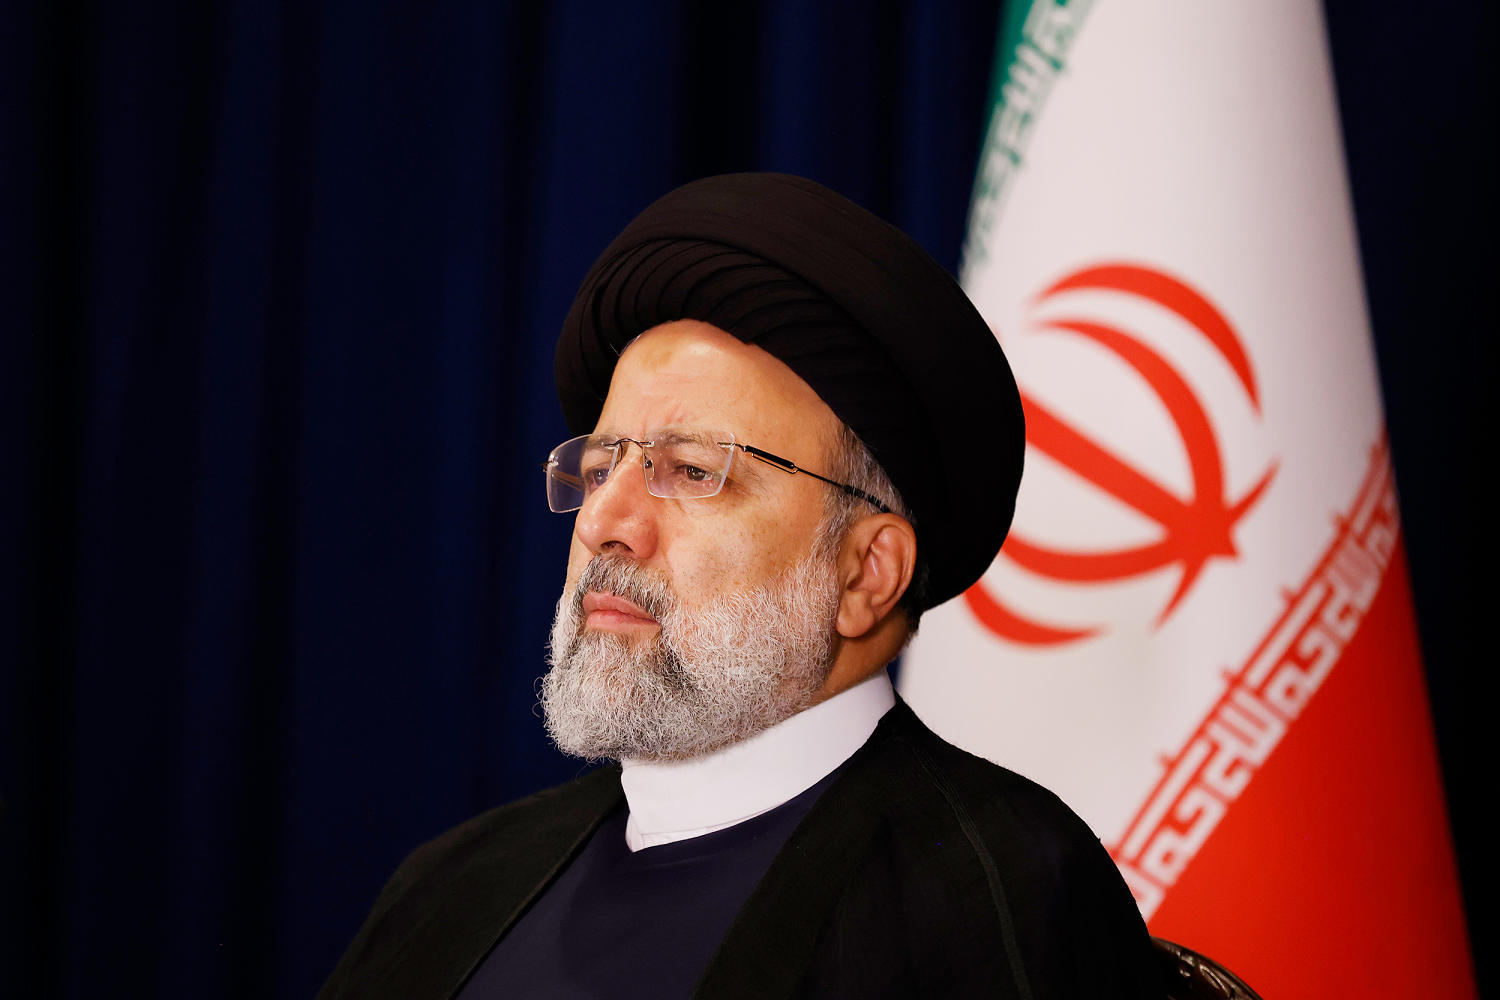 Helicopter carrying Iran’s President Raisi suffers ‘crash landing’; search and rescue underway